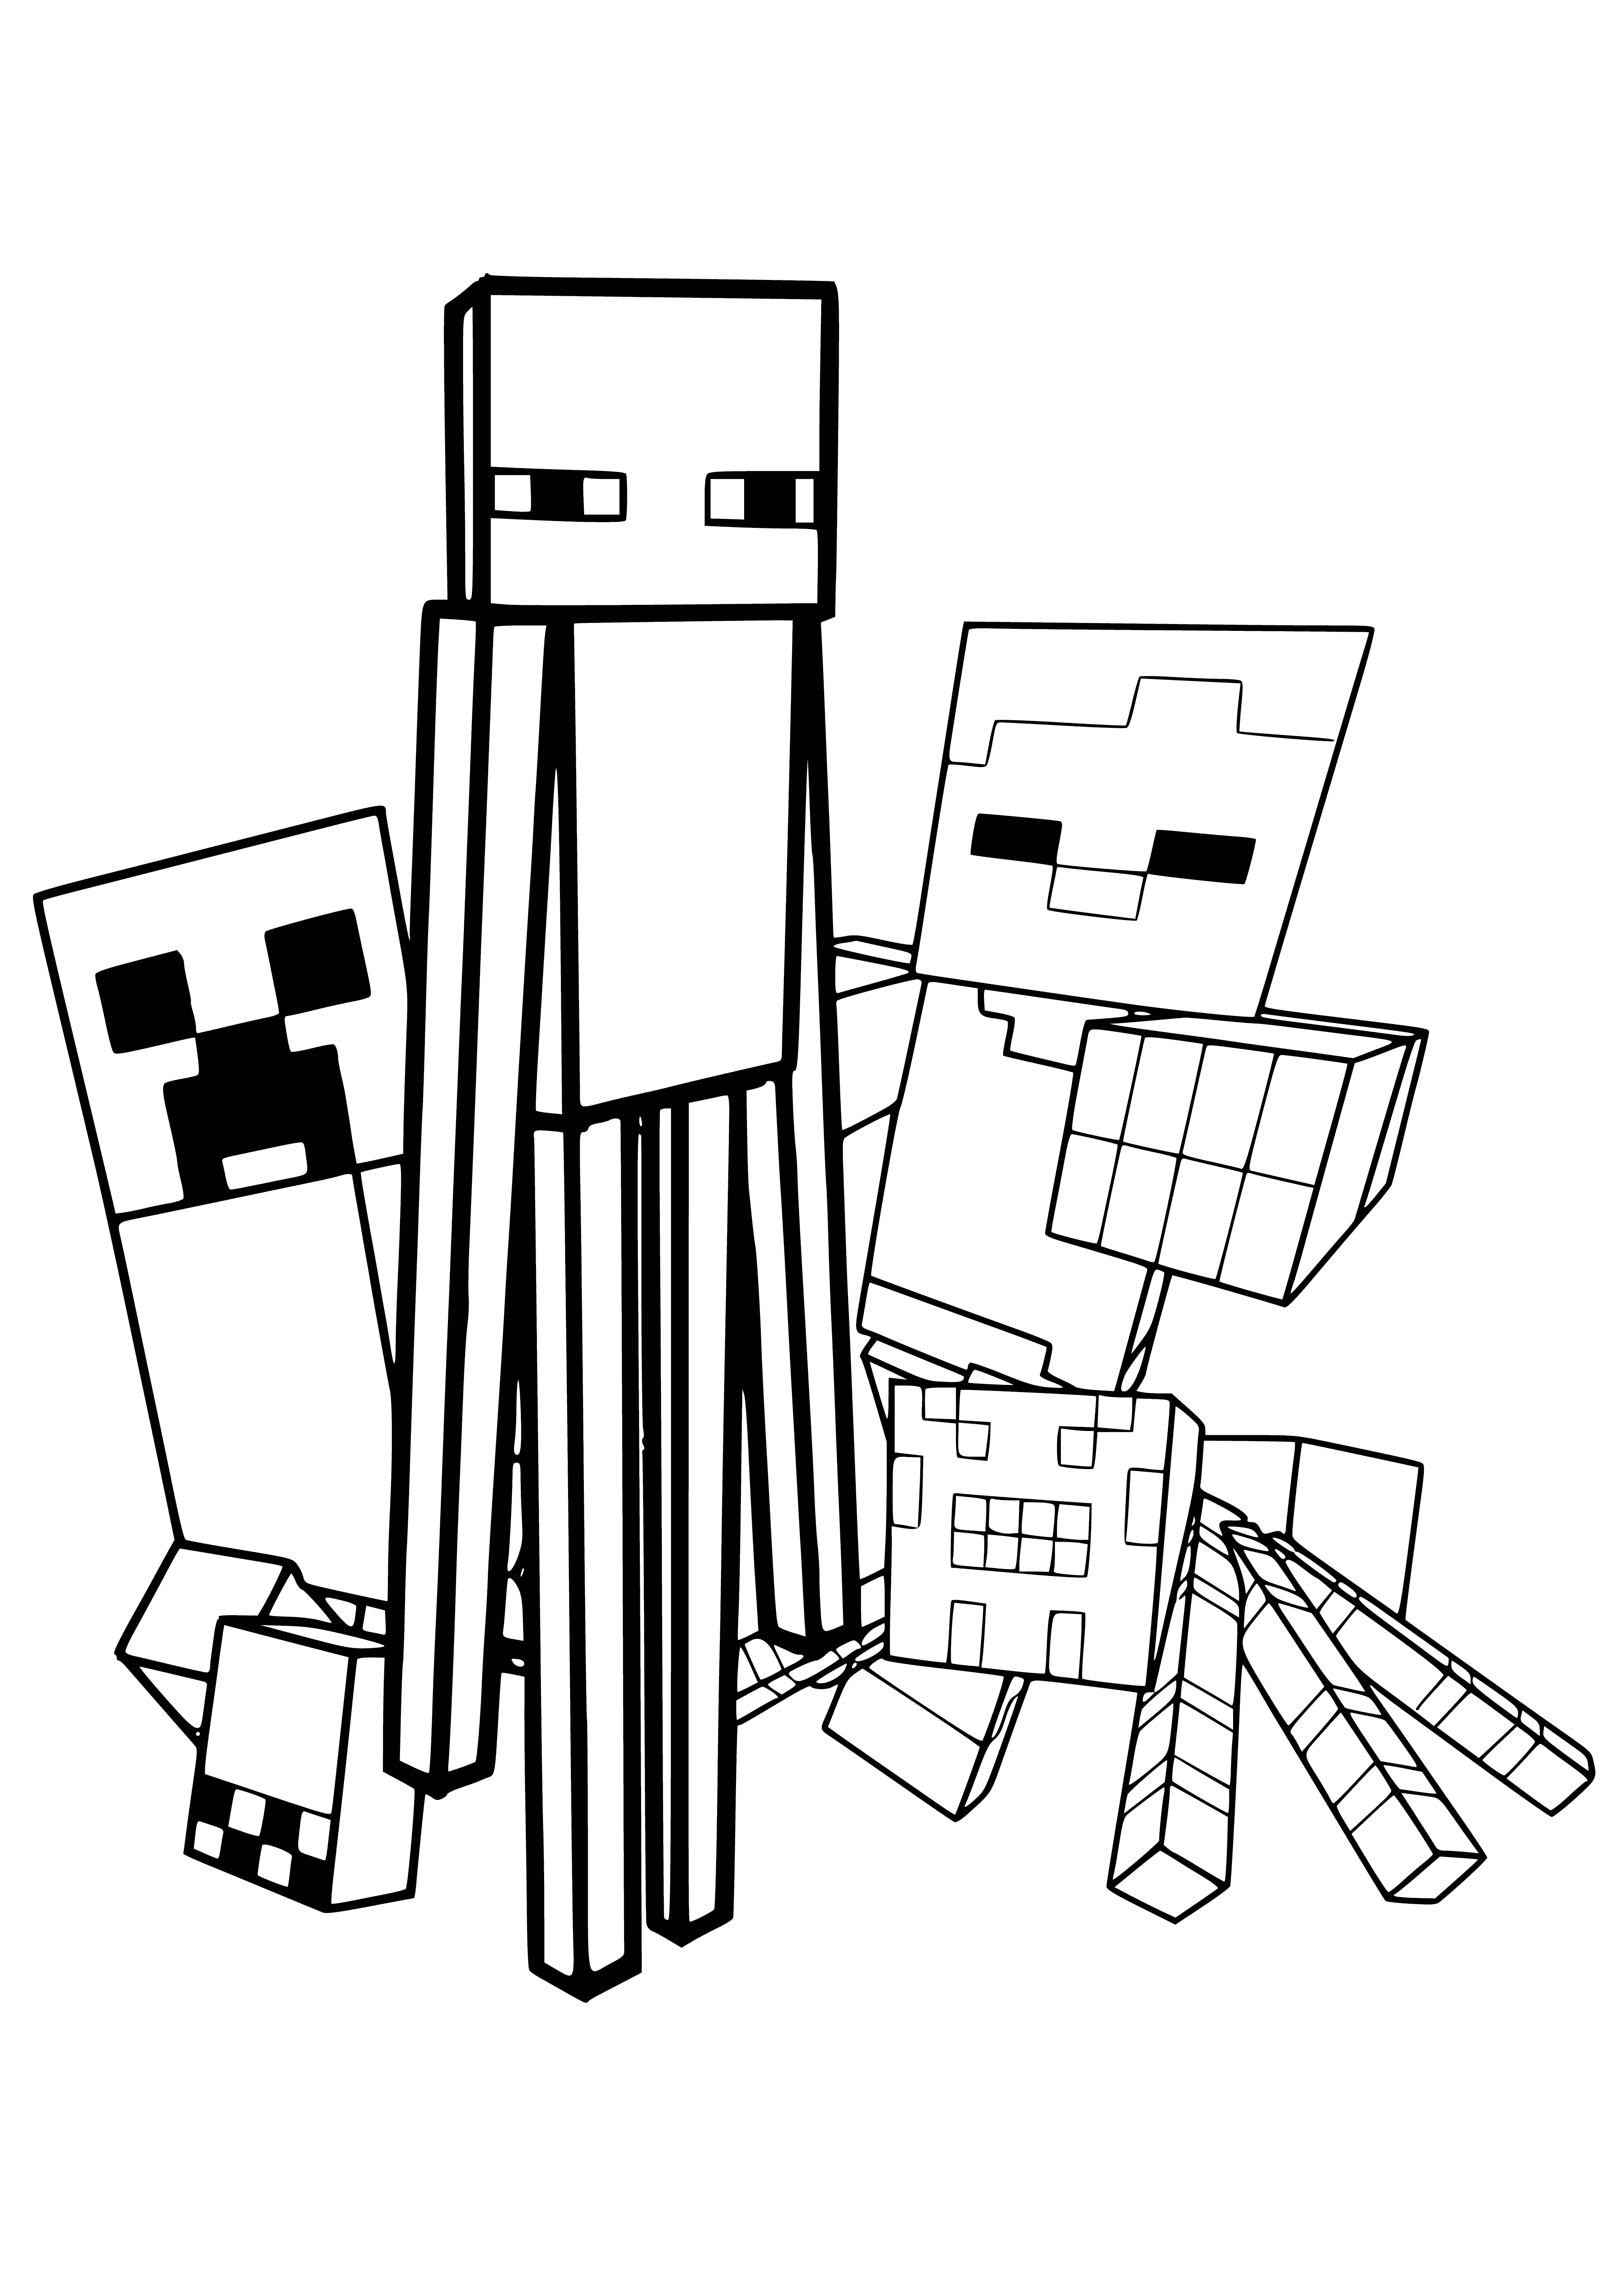 coloring page: From left: Creeper, Zombie, 2 Skeletons, Spider.